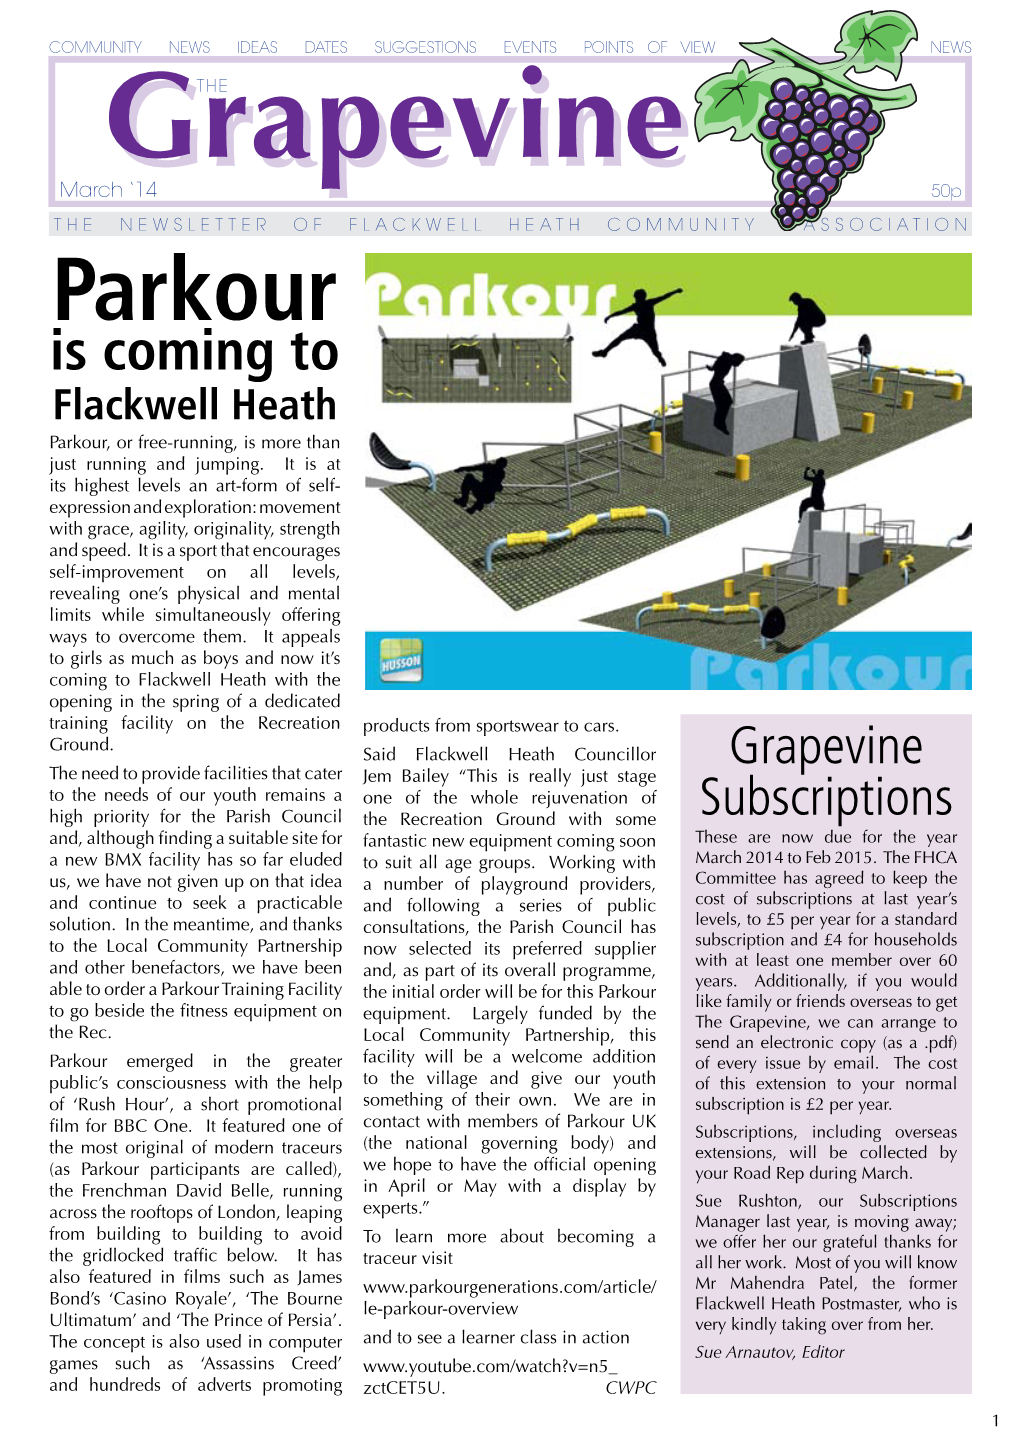 Parkour Is Coming to Flackwell Heath Parkour, Or Free-Running, Is More Than Just Running and Jumping